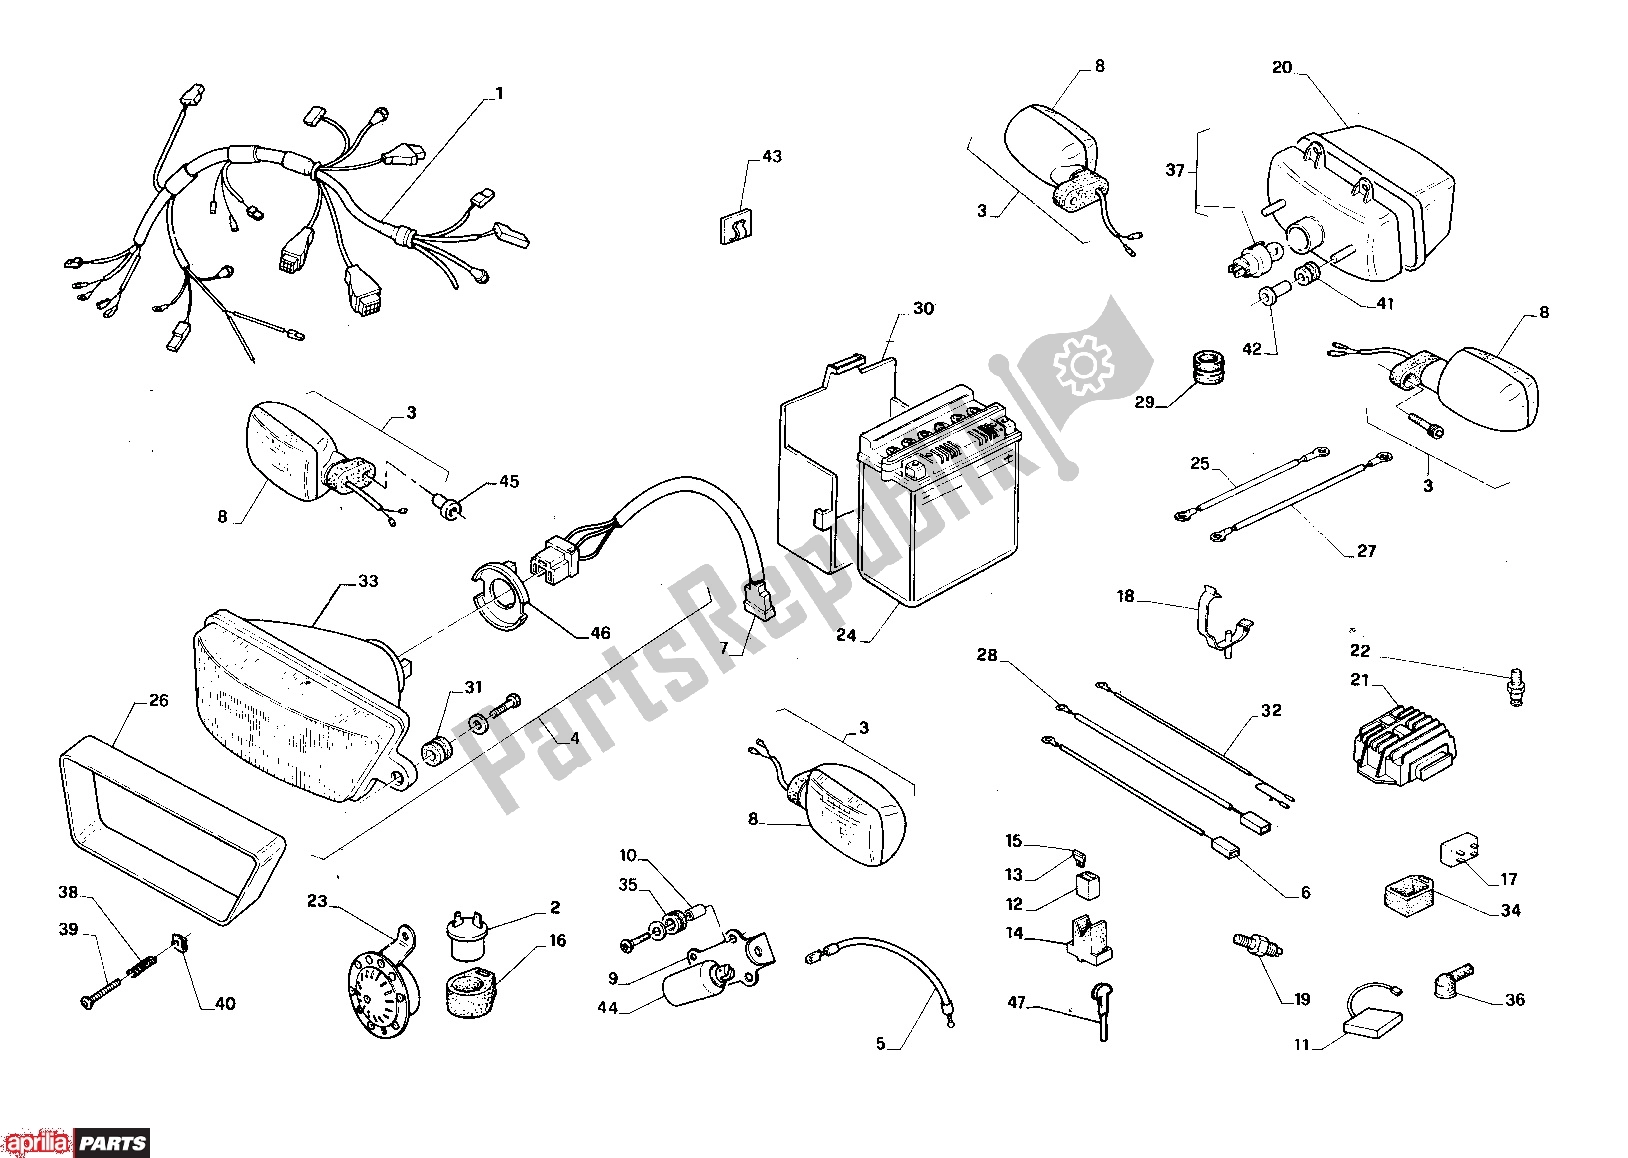 All parts for the Electrical System I of the Aprilia AF1 Futura 316 125 1990 - 1992